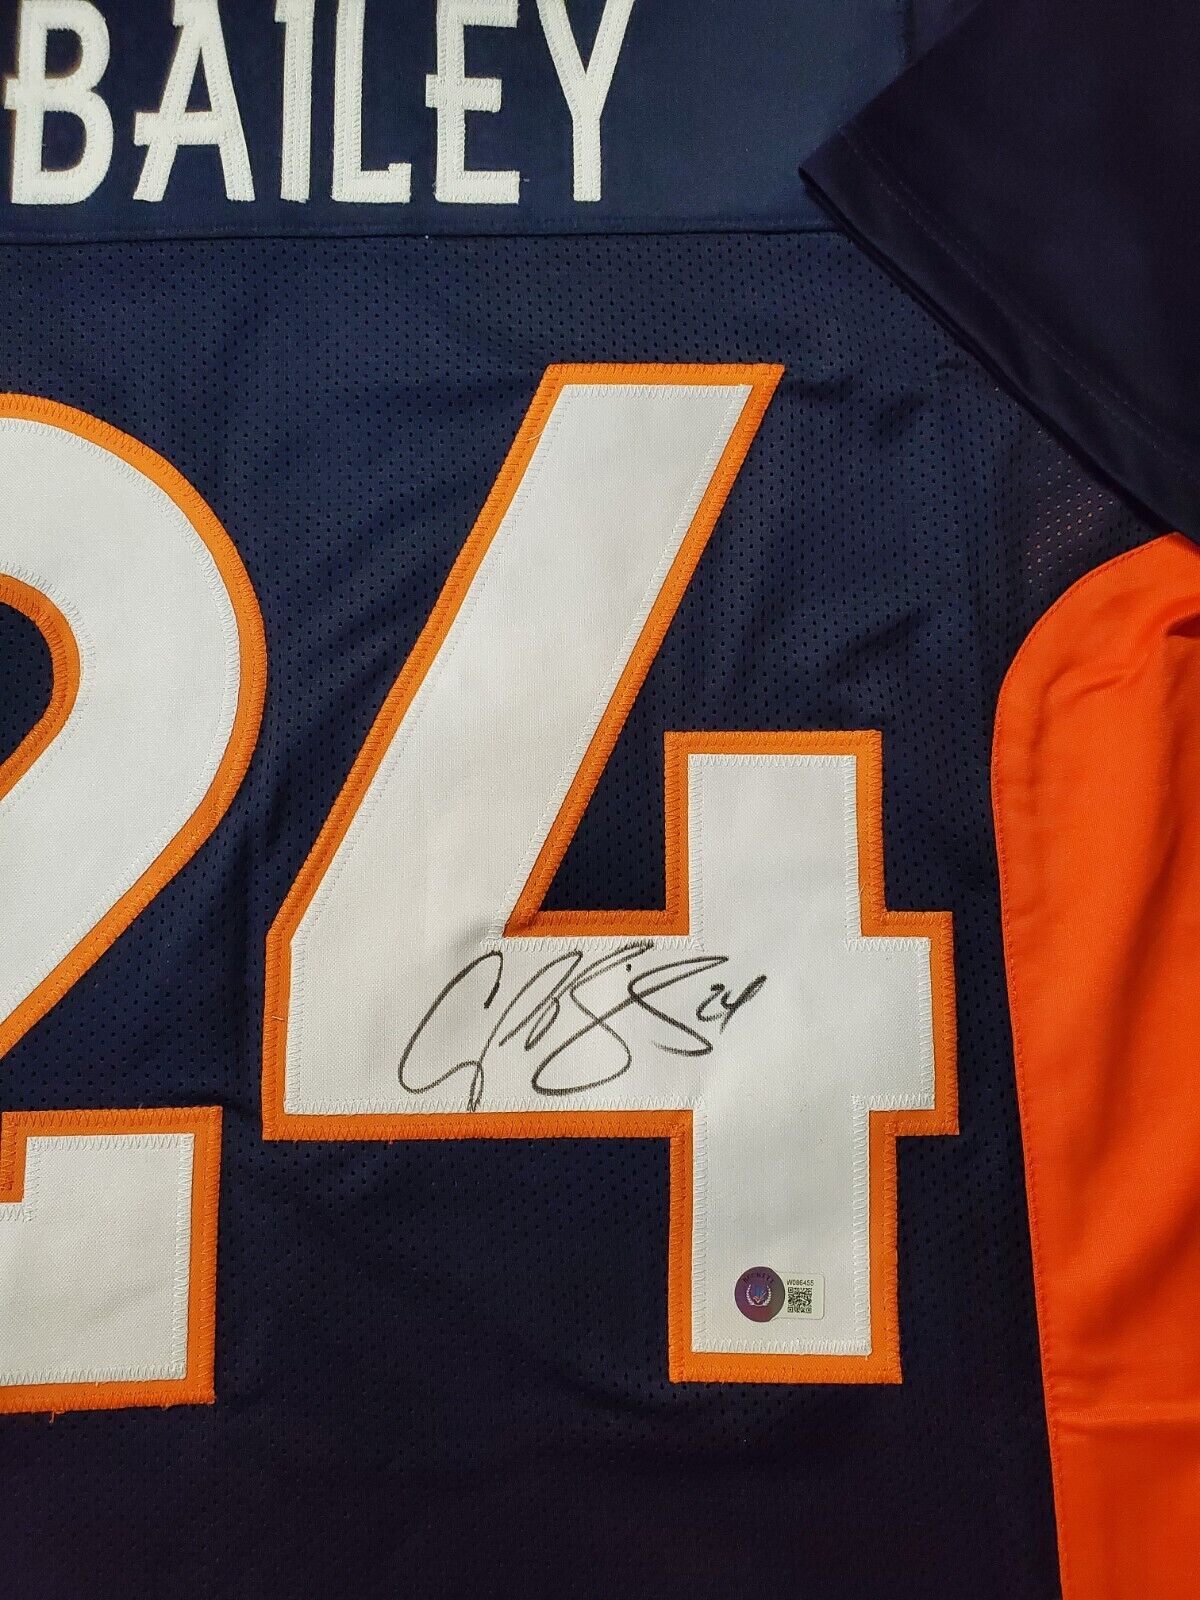 MVP Authentics Denver Broncos Champ Bailey Autographed Signed Jersey Beckett Holo 171 sports jersey framing , jersey framing